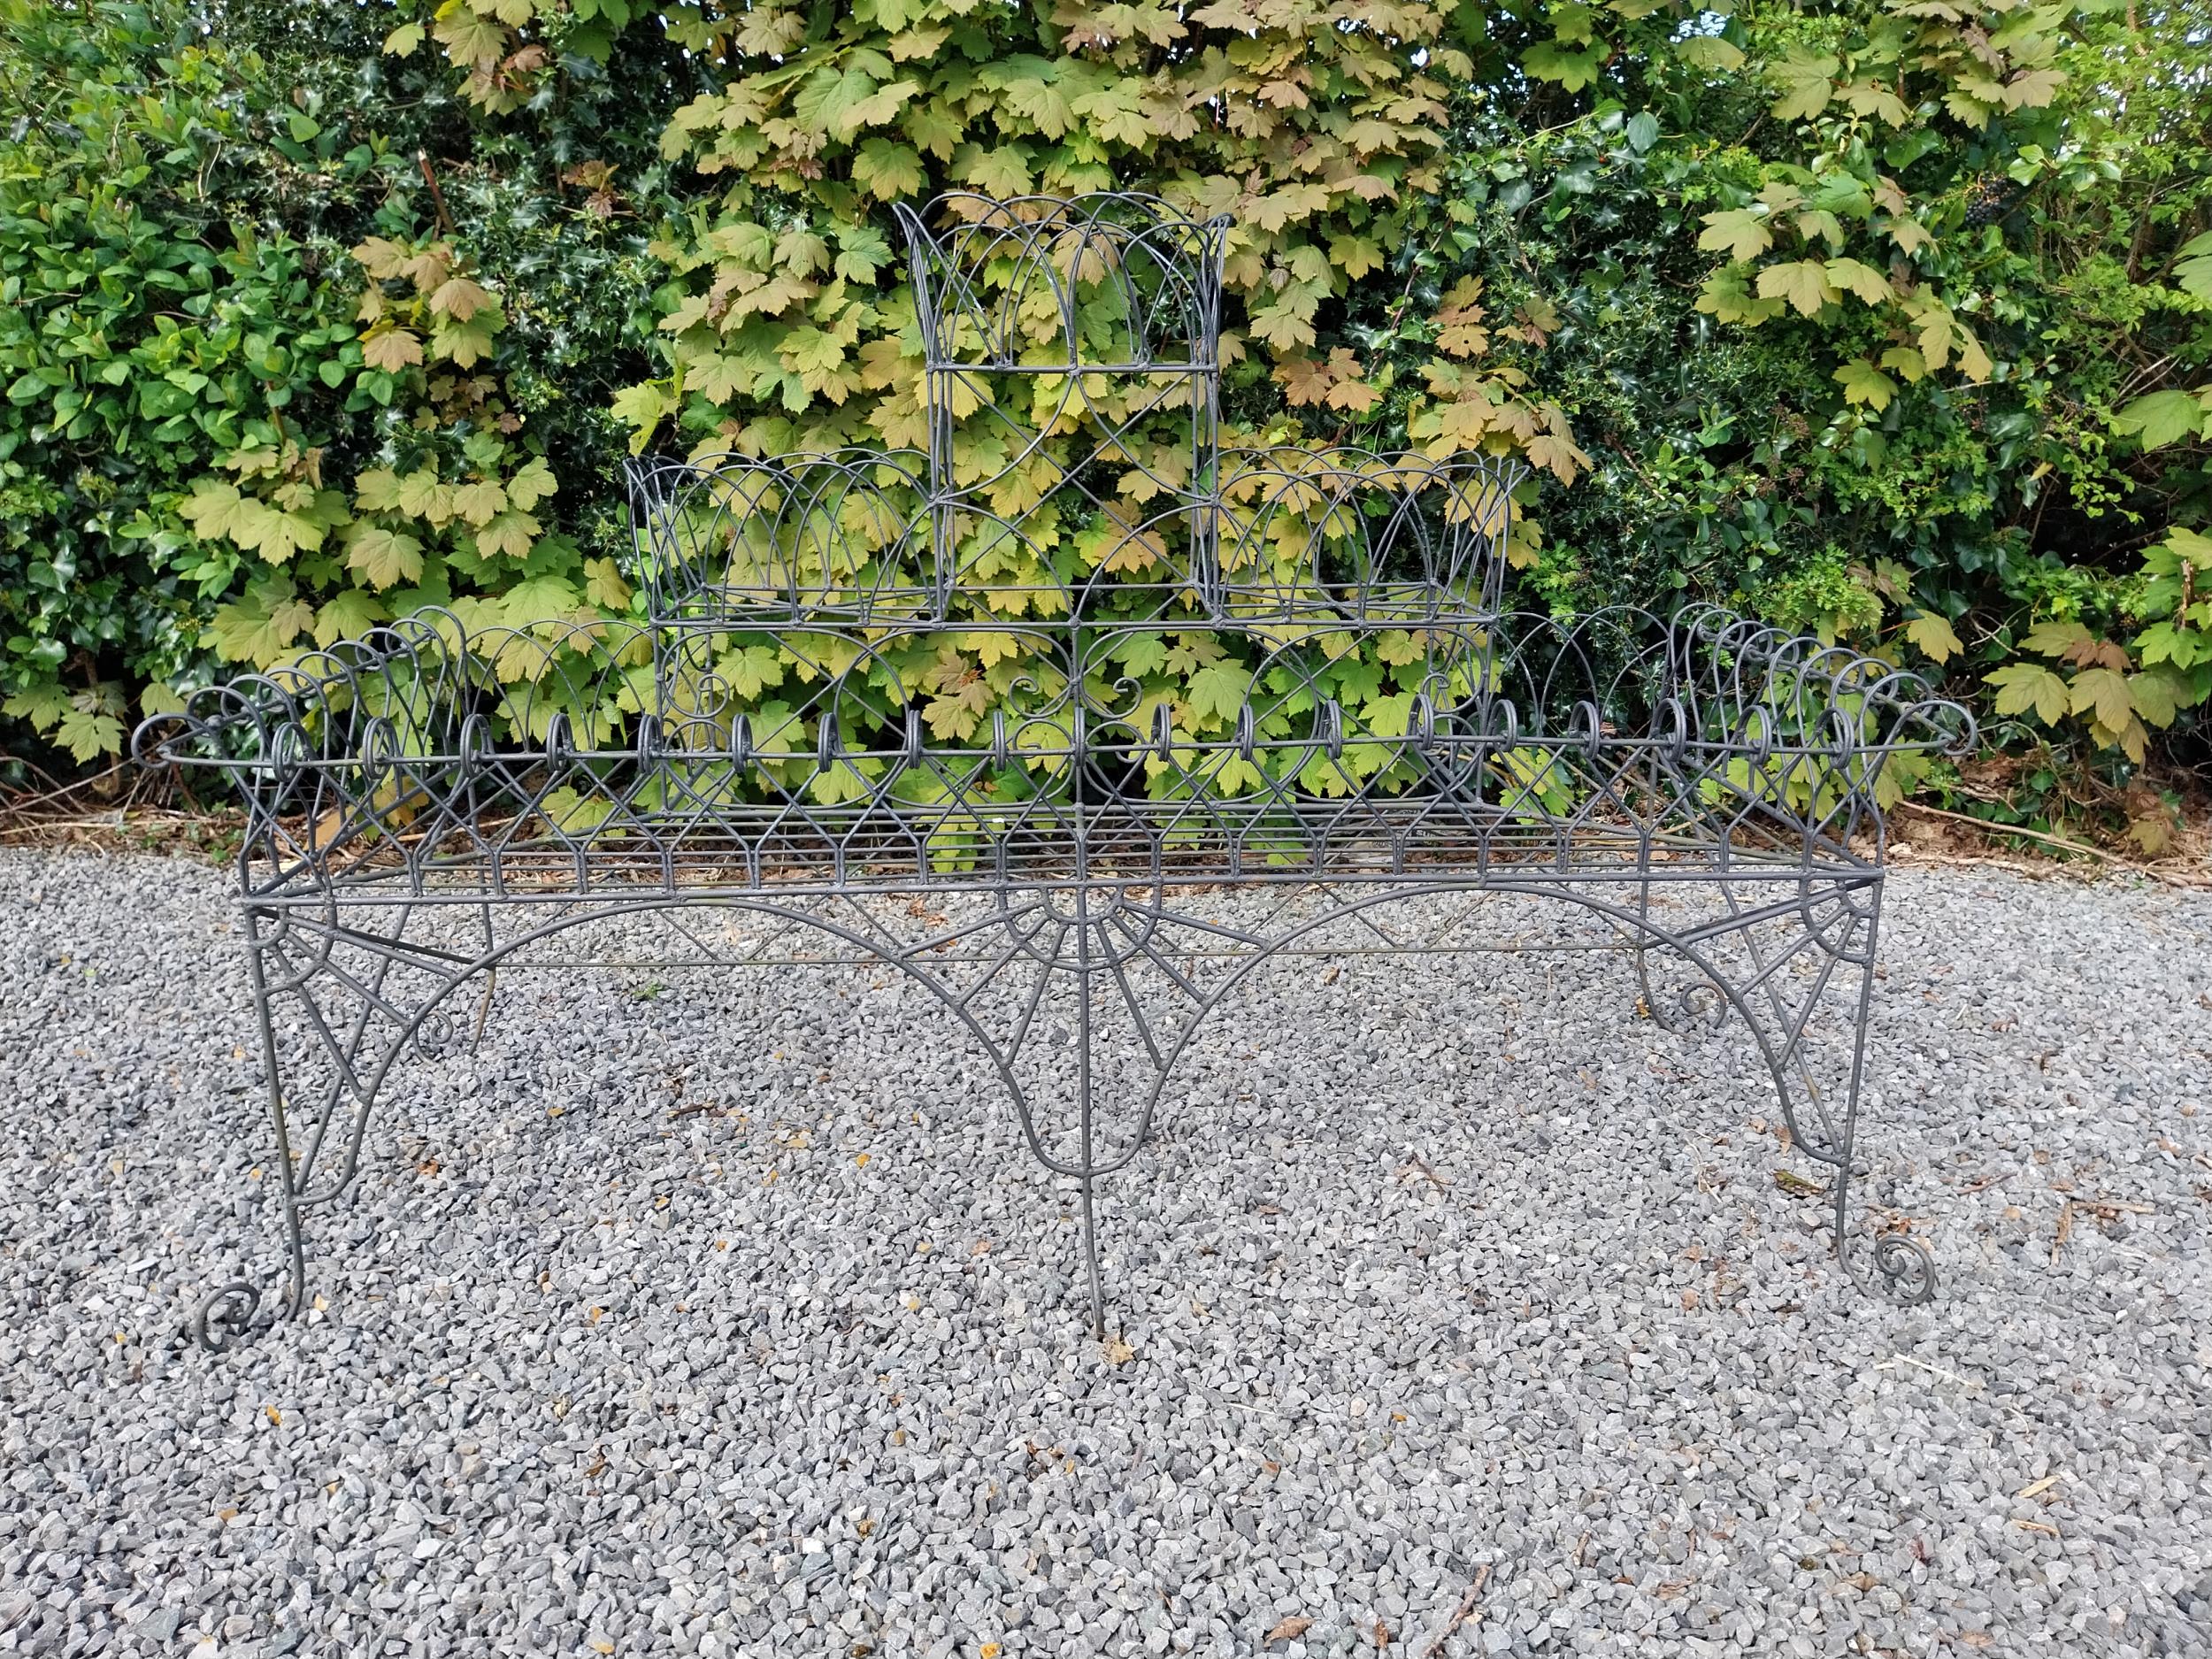 Wrought iron wired three-tiered waterfall plant stand {105 cm H x 168 cm W x 67 cm D}.